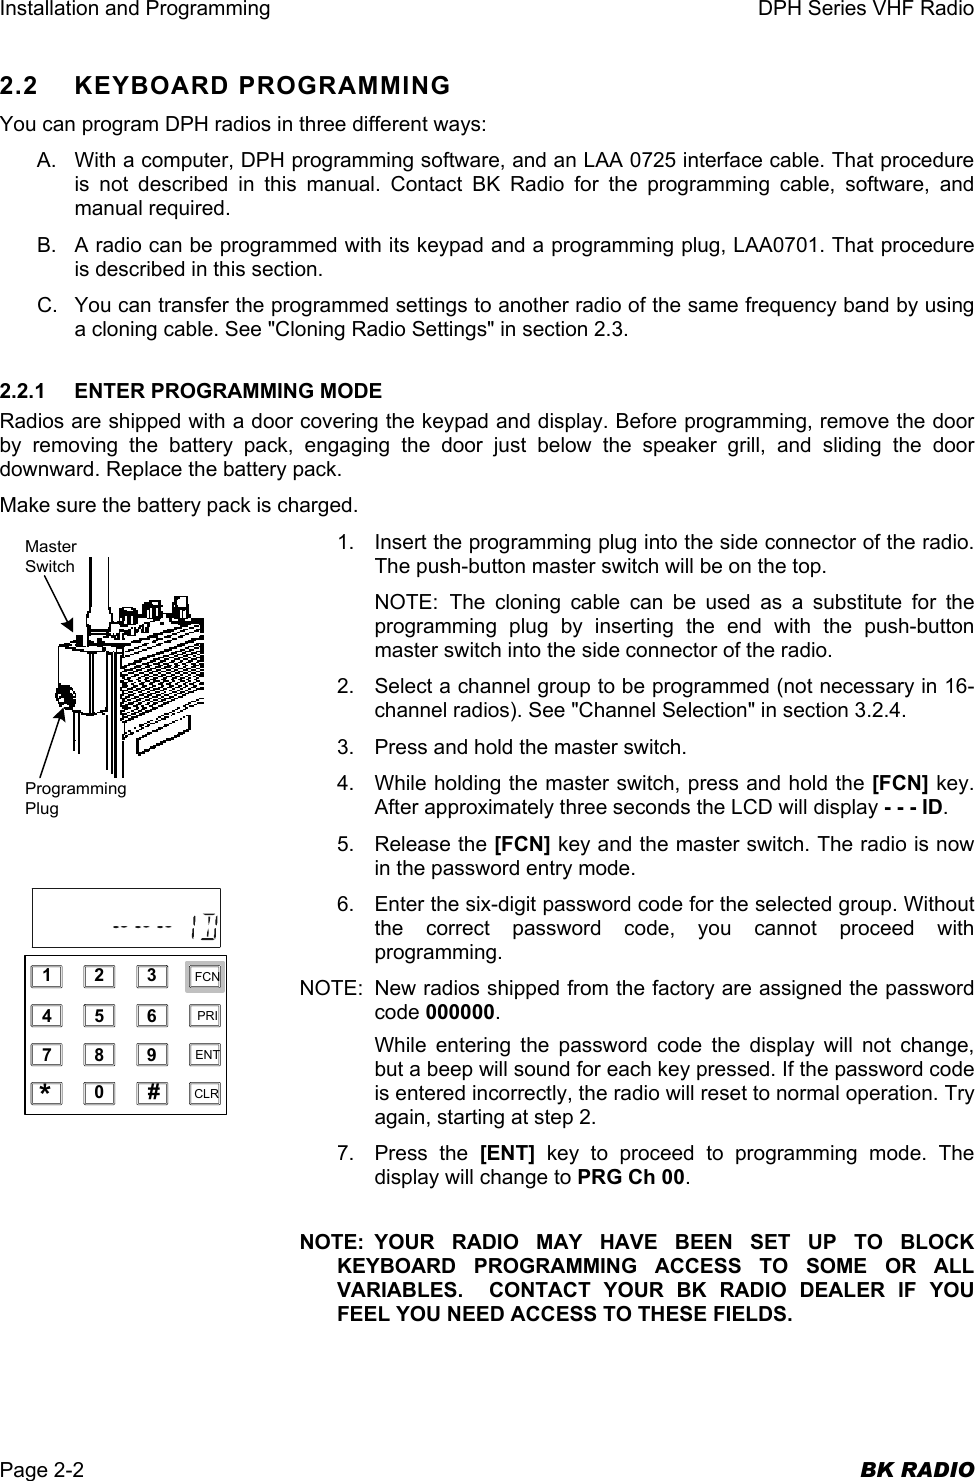 Installation and Programming  DPH Series VHF Radio  Page 2-2  BK RADIO 2.2 KEYBOARD PROGRAMMING You can program DPH radios in three different ways: A.  With a computer, DPH programming software, and an LAA 0725 interface cable. That procedure is not described in this manual. Contact BK Radio for the programming cable, software, and manual required. B.  A radio can be programmed with its keypad and a programming plug, LAA0701. That procedure is described in this section. C.  You can transfer the programmed settings to another radio of the same frequency band by using a cloning cable. See &quot;Cloning Radio Settings&quot; in section 2.3. 2.2.1  ENTER PROGRAMMING MODE Radios are shipped with a door covering the keypad and display. Before programming, remove the door by removing the battery pack, engaging the door just below the speaker grill, and sliding the door downward. Replace the battery pack. Make sure the battery pack is charged. 1.  Insert the programming plug into the side connector of the radio. The push-button master switch will be on the top. NOTE: The cloning cable can be used as a substitute for the programming plug by inserting the end with the push-button master switch into the side connector of the radio. 2.  Select a channel group to be programmed (not necessary in 16-channel radios). See &quot;Channel Selection&quot; in section 3.2.4. 3.  Press and hold the master switch. 4.  While holding the master switch, press and hold the [FCN] key. After approximately three seconds the LCD will display - - - ID. 5. Release the [FCN] key and the master switch. The radio is now in the password entry mode. 6.  Enter the six-digit password code for the selected group. Without the correct password code, you cannot proceed with programming. NOTE:  New radios shipped from the factory are assigned the password code 000000. While entering the password code the display will not change, but a beep will sound for each key pressed. If the password code is entered incorrectly, the radio will reset to normal operation. Try again, starting at step 2. 7. Press the [ENT] key to proceed to programming mode. The display will change to PRG Ch 00.  NOTE: YOUR RADIO MAY HAVE BEEN SET UP TO BLOCK KEYBOARD PROGRAMMING ACCESS TO SOME OR ALL VARIABLES.  CONTACT YOUR BK RADIO DEALER IF YOU FEEL YOU NEED ACCESS TO THESE FIELDS.  MasterSwitchProgrammingPlug1234567890*#CLRFCNPRIENT